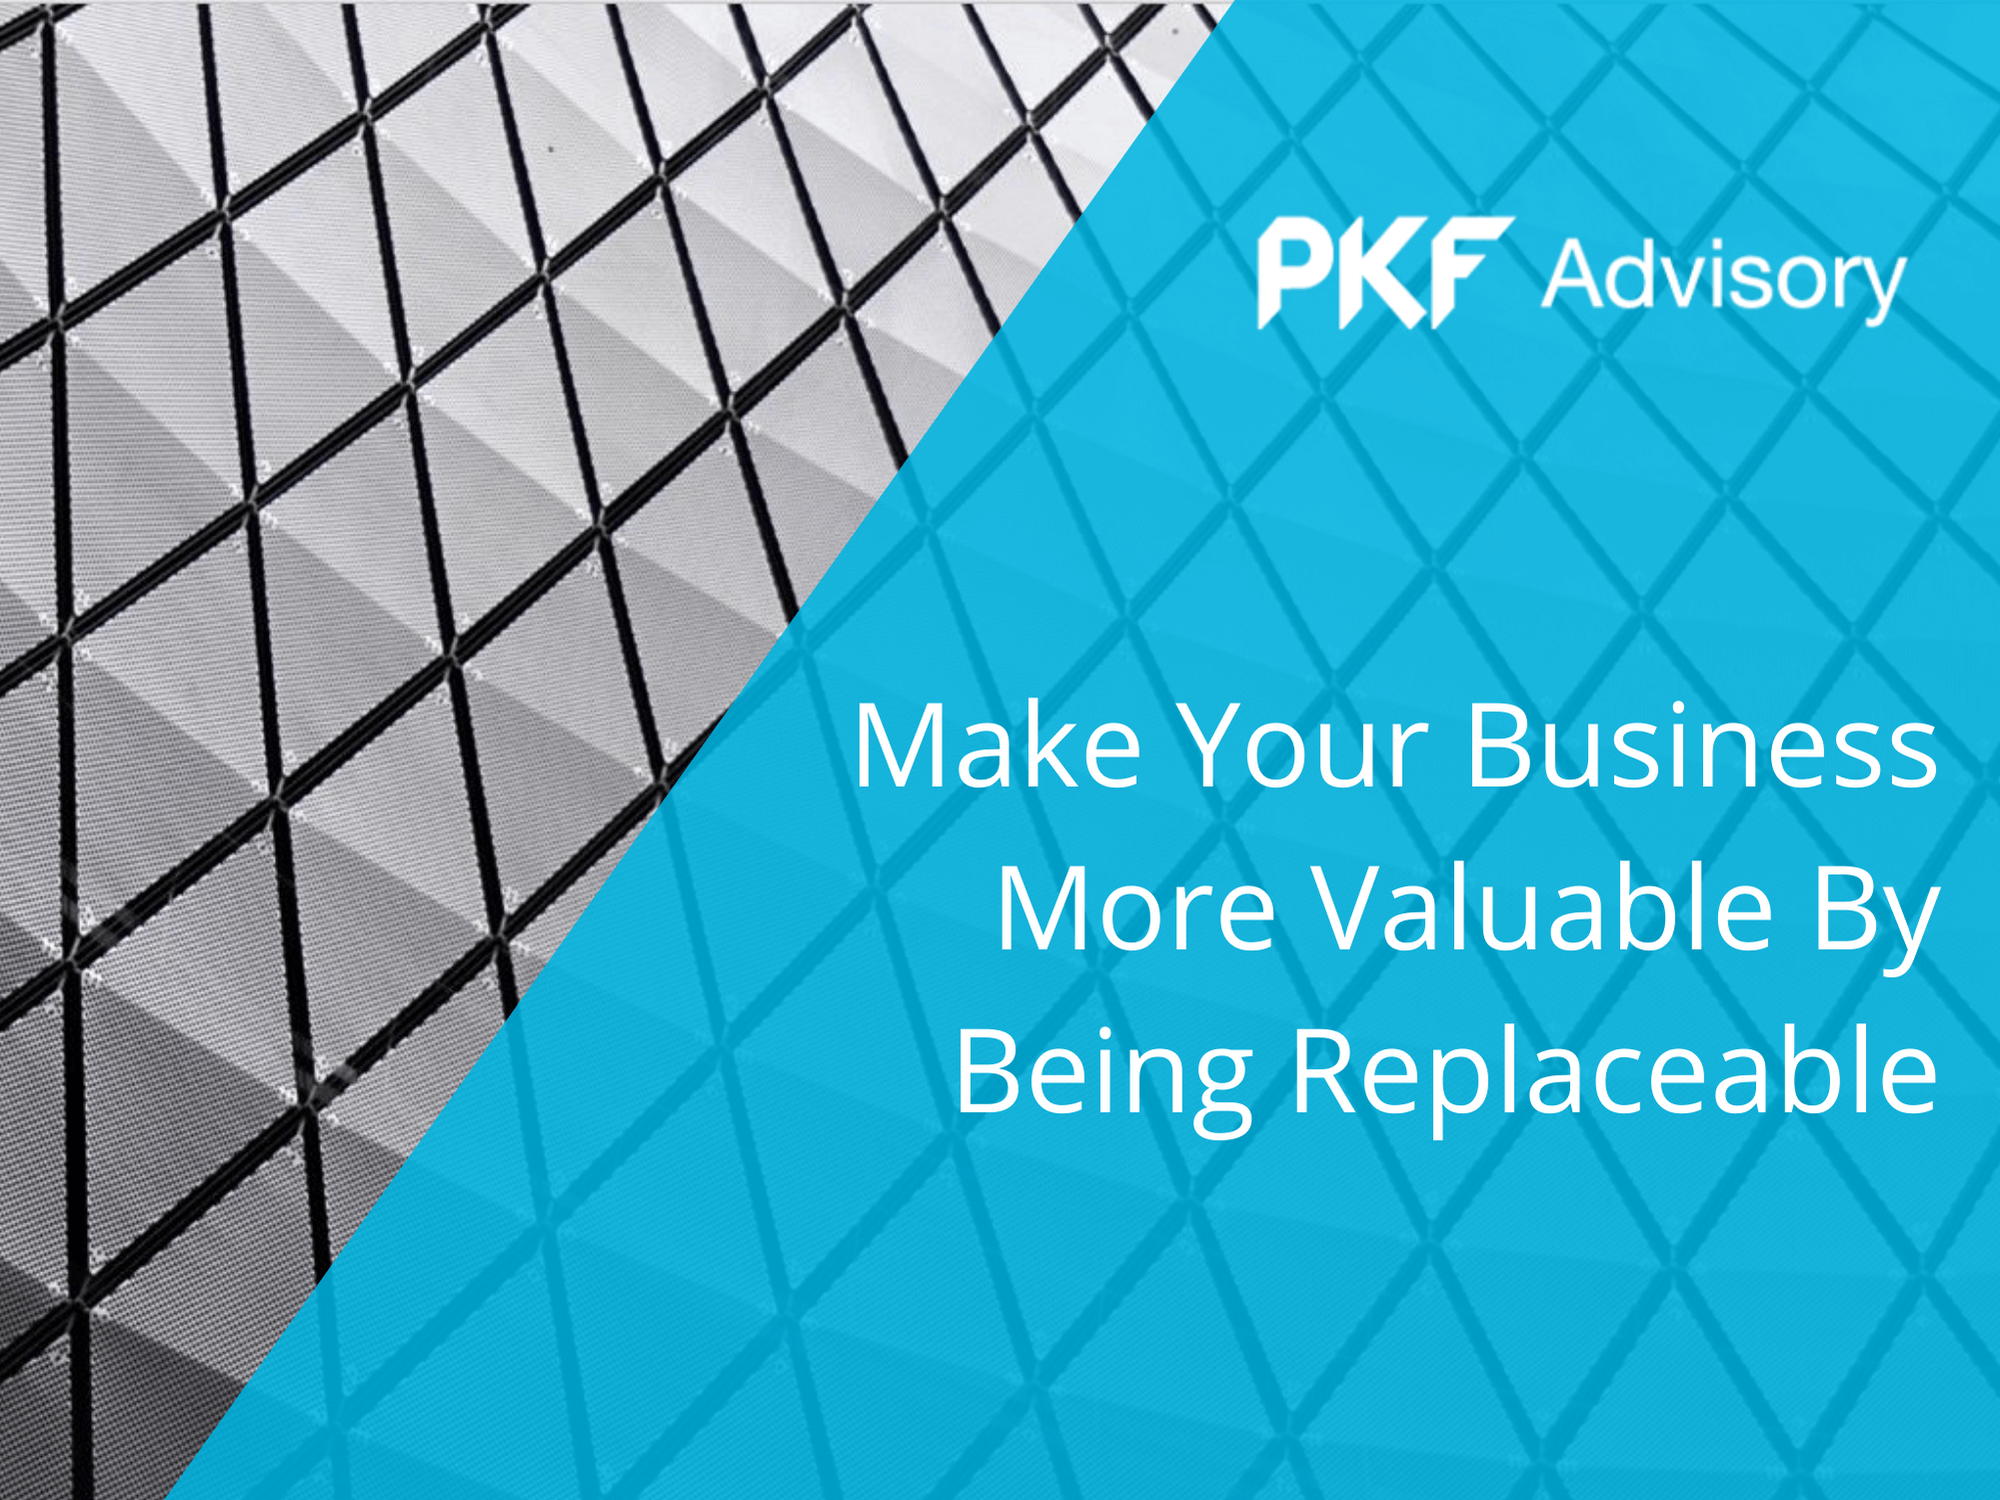 Make Your Business More Valuable By Being Replaceable